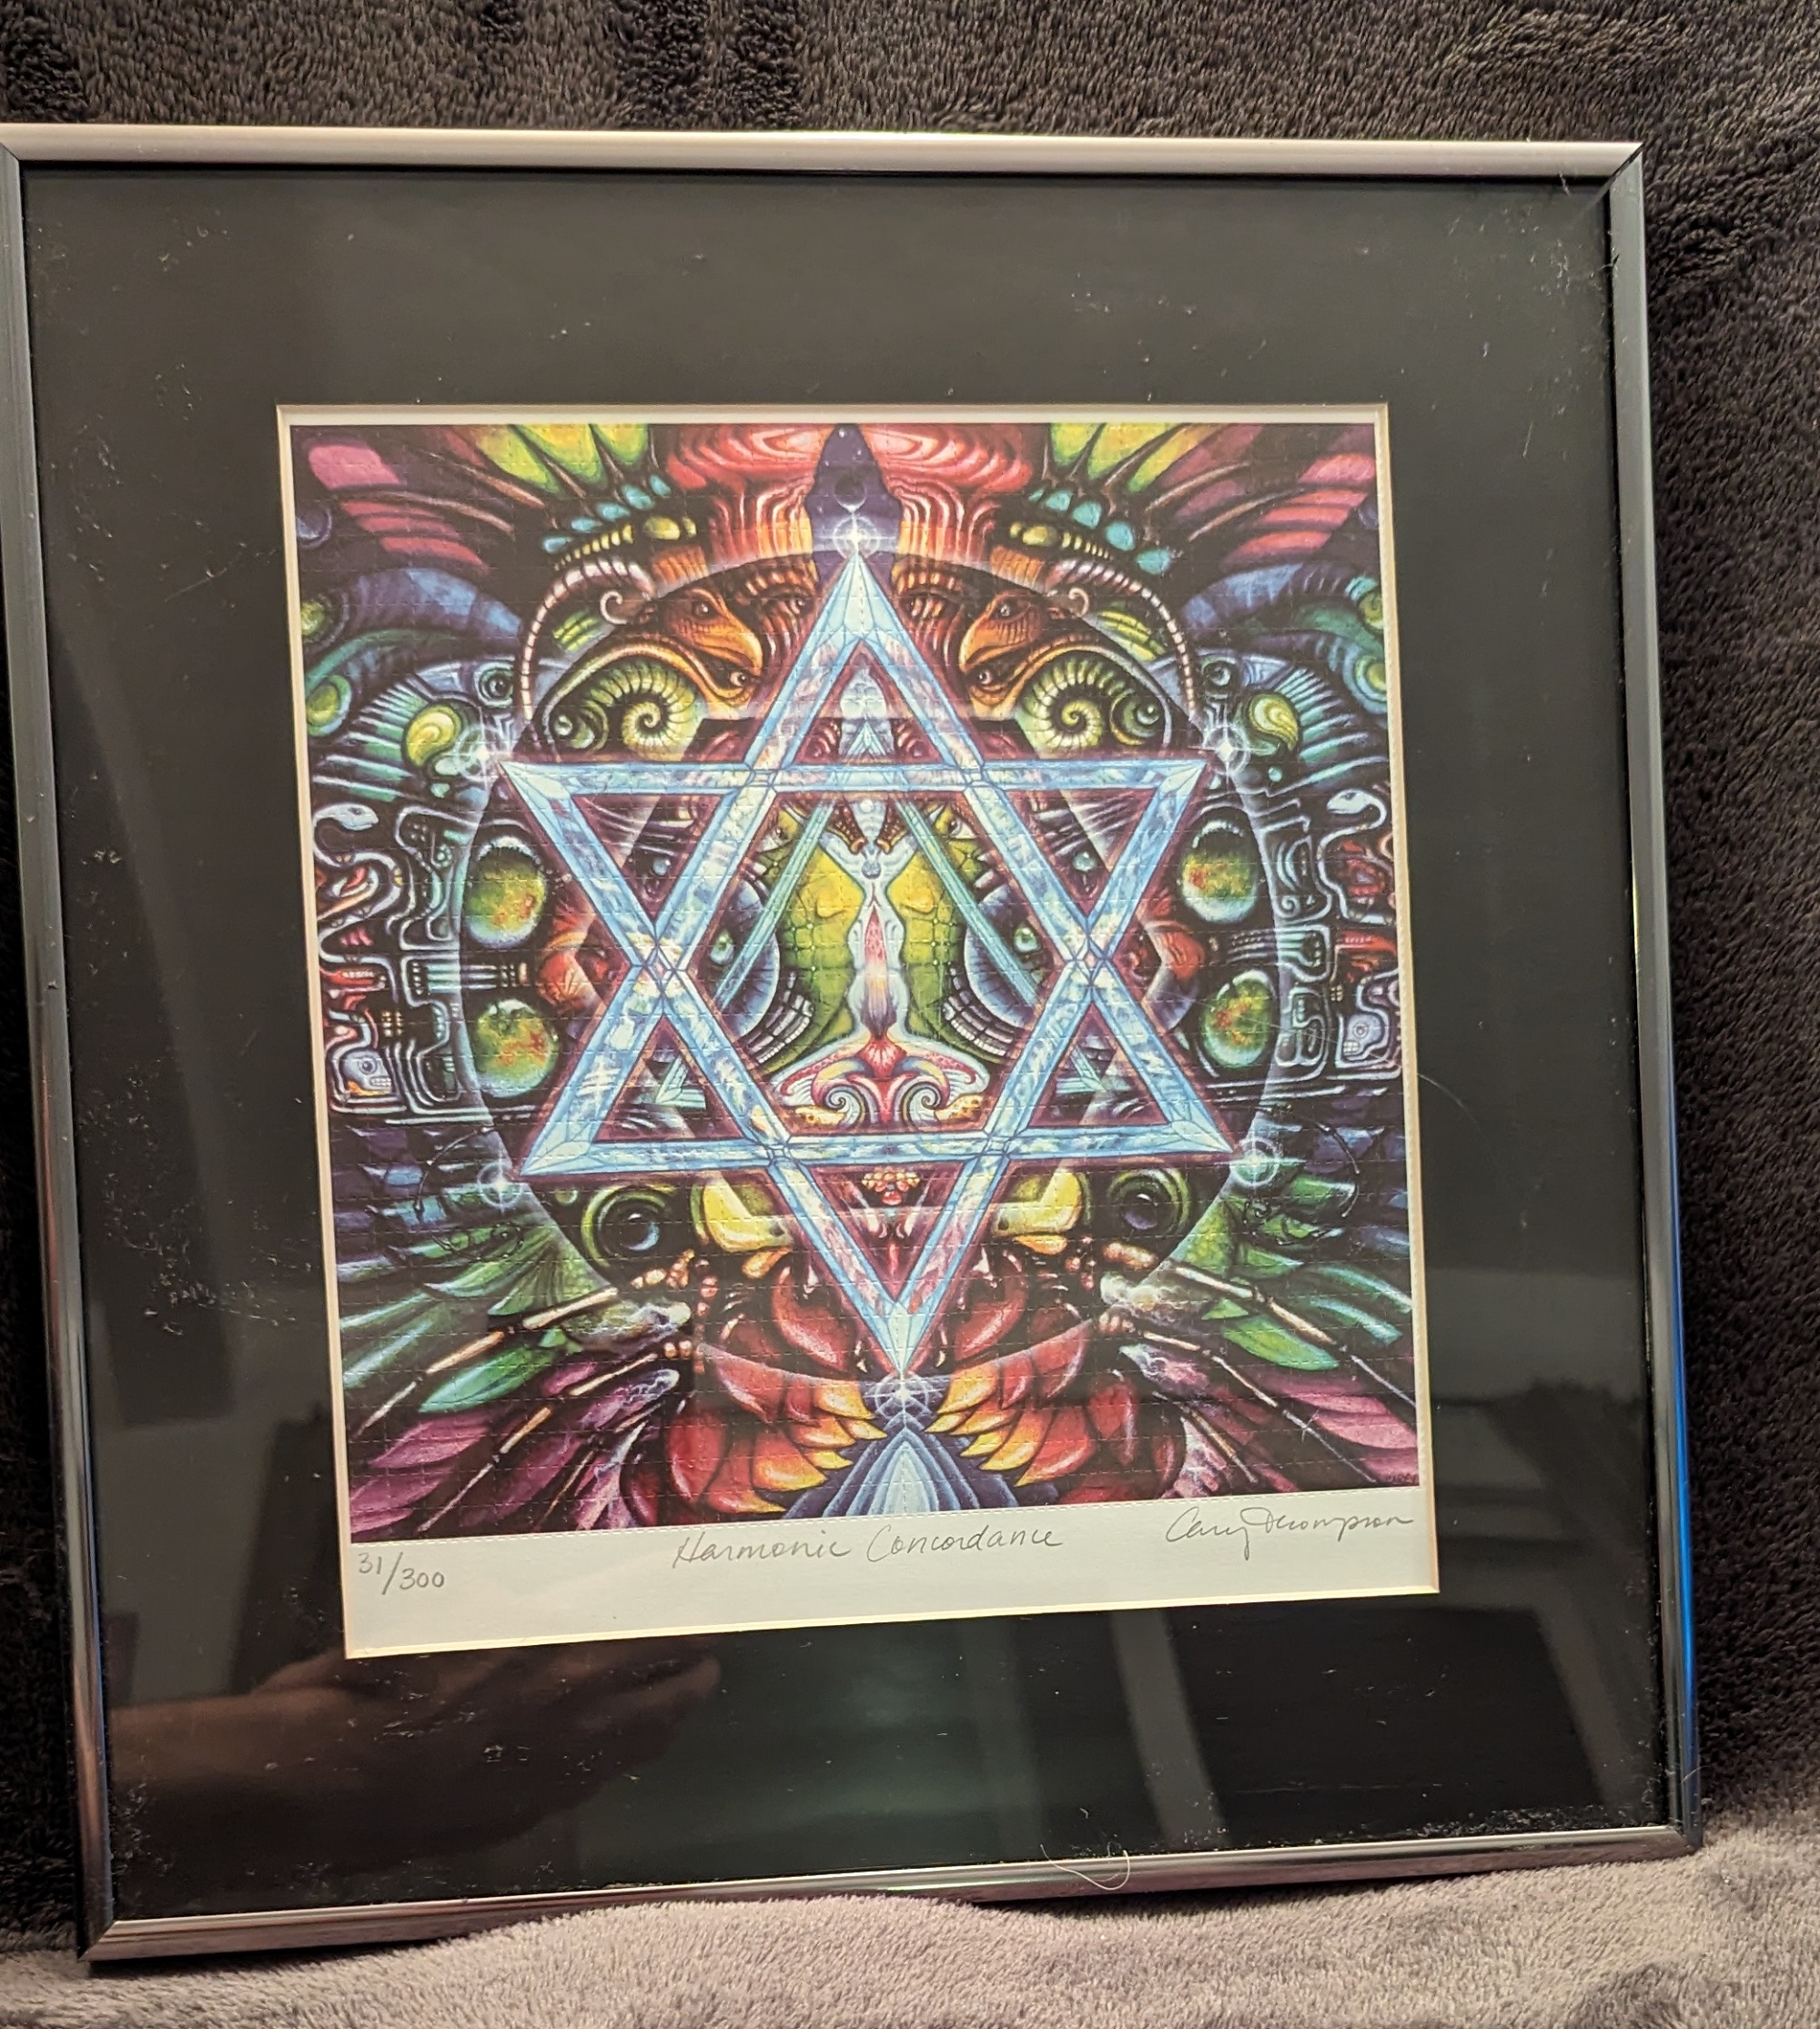 An example of the LSD blotter art print Harmonic Concordance, Signed and Framed